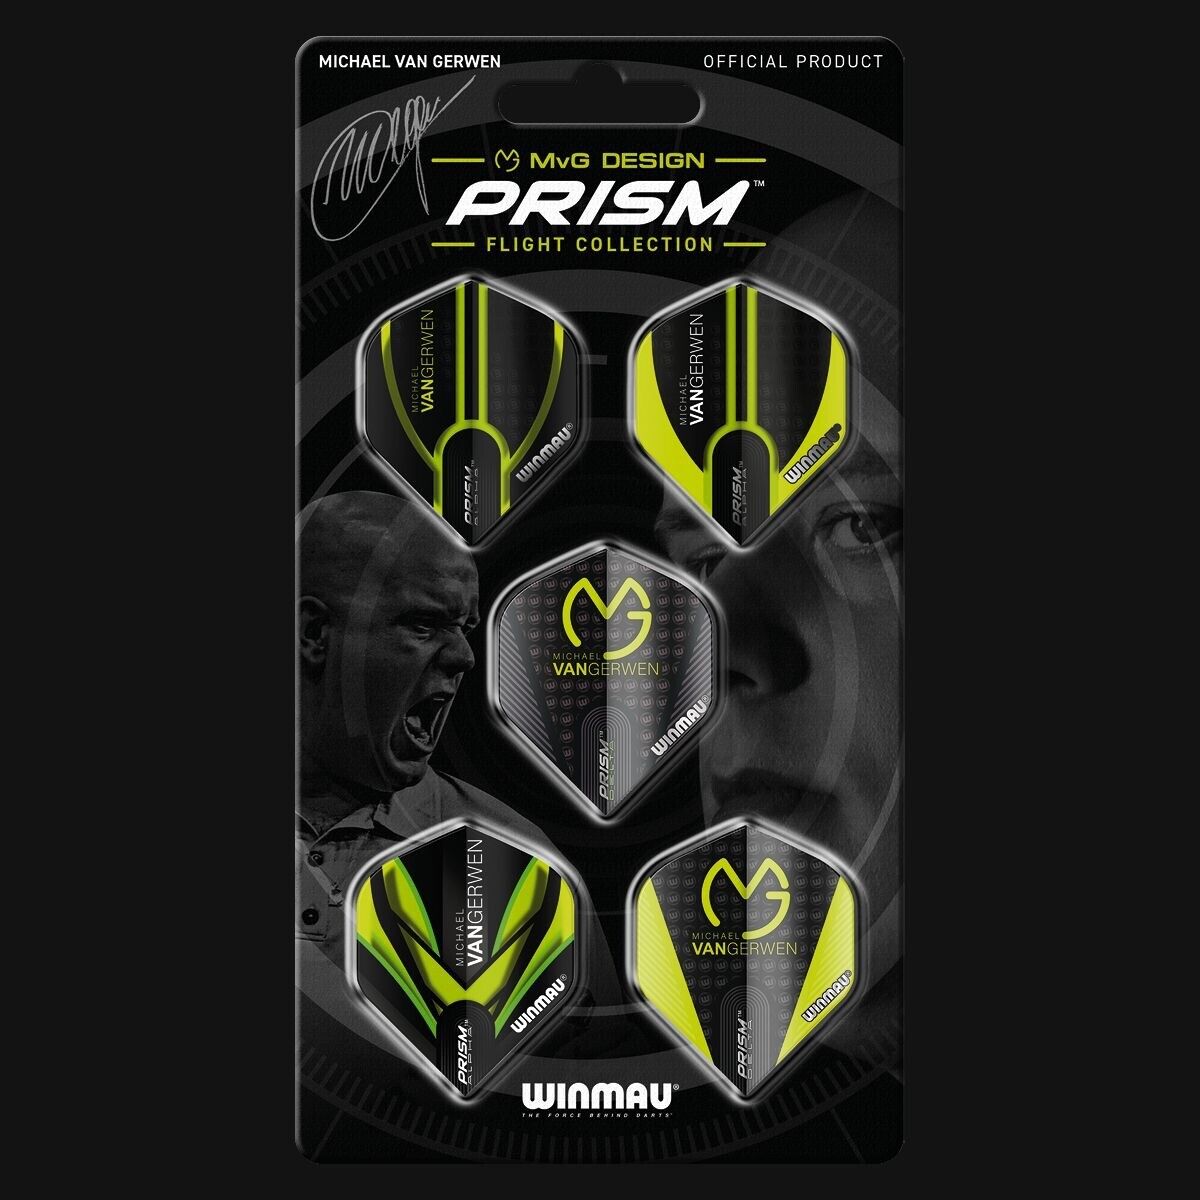 WINMAU PRISM FLIGHT COLLECTIONS MVG DESIGN 5 PACK NEW SHIPS FREE